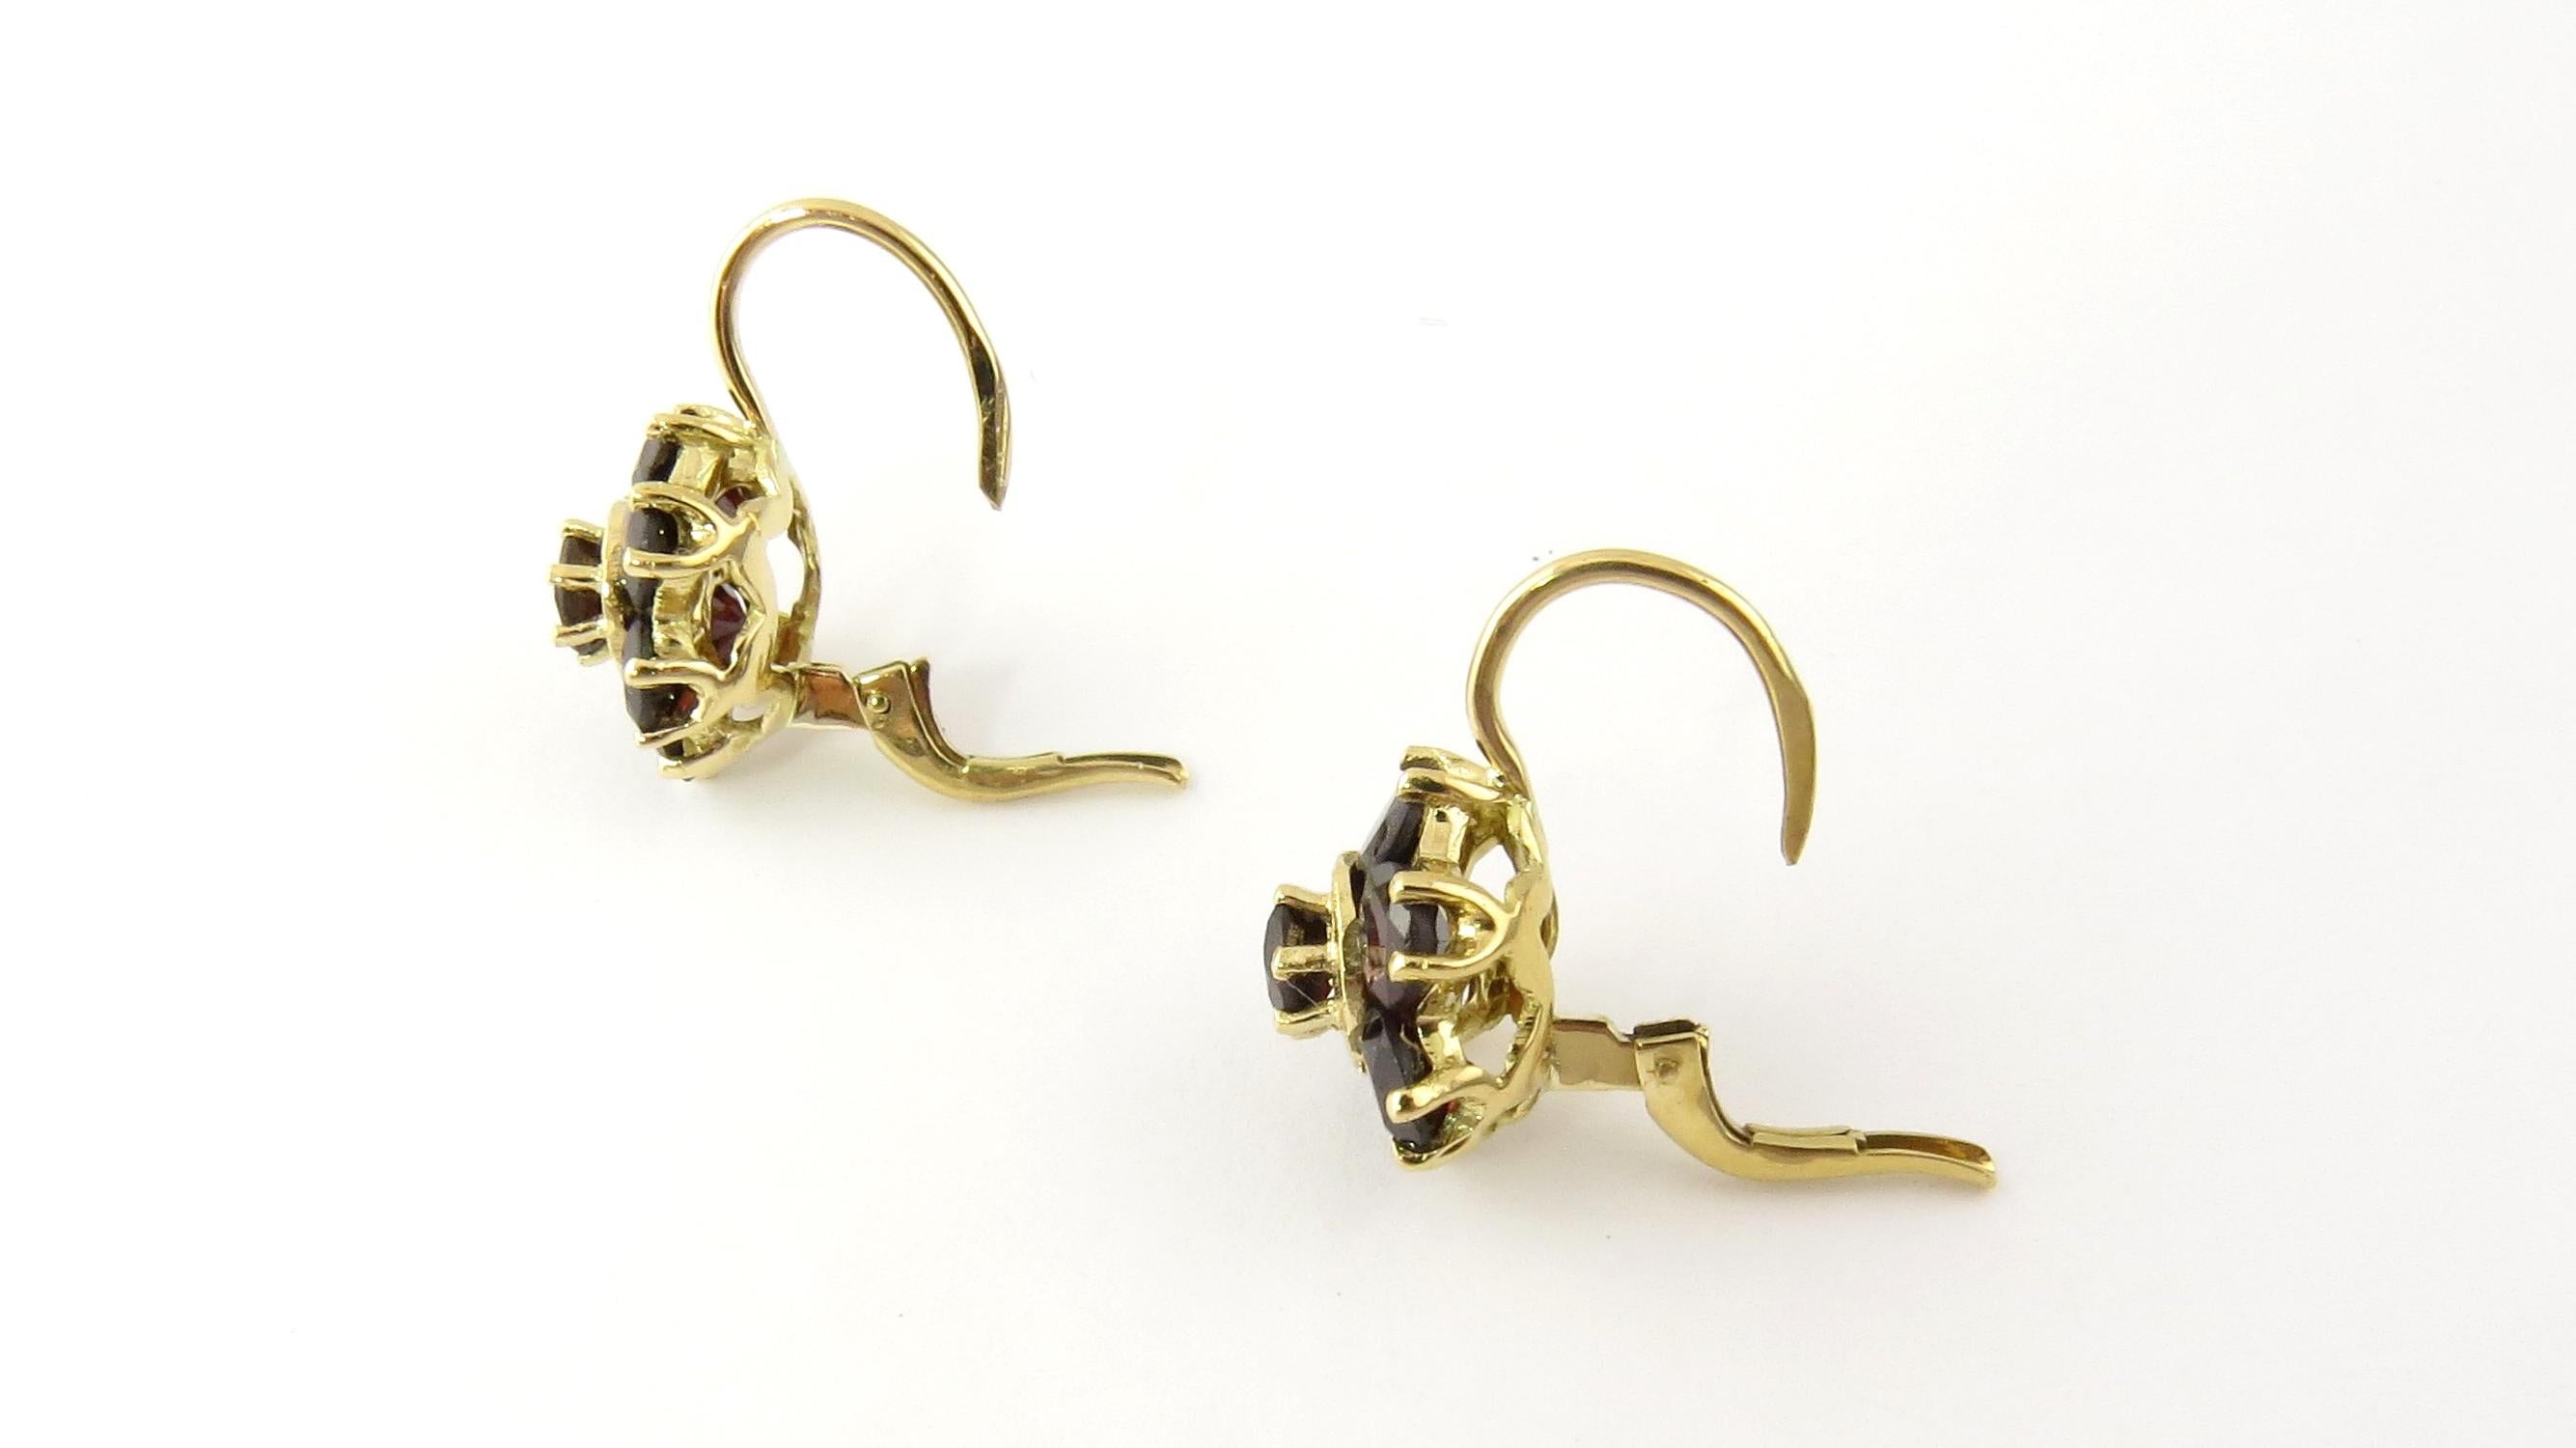 Vintage 14 Karat Yellow Gold Garnet Earrings

These lovely hinged earrings each feature seven round garnets (5 mm each) set in classic 14K yellow gold.

Size: 13 mm

Weight: 4.3 dwt. / 6.7 gr.

Acid tested for 14K gold.

Very good condition,